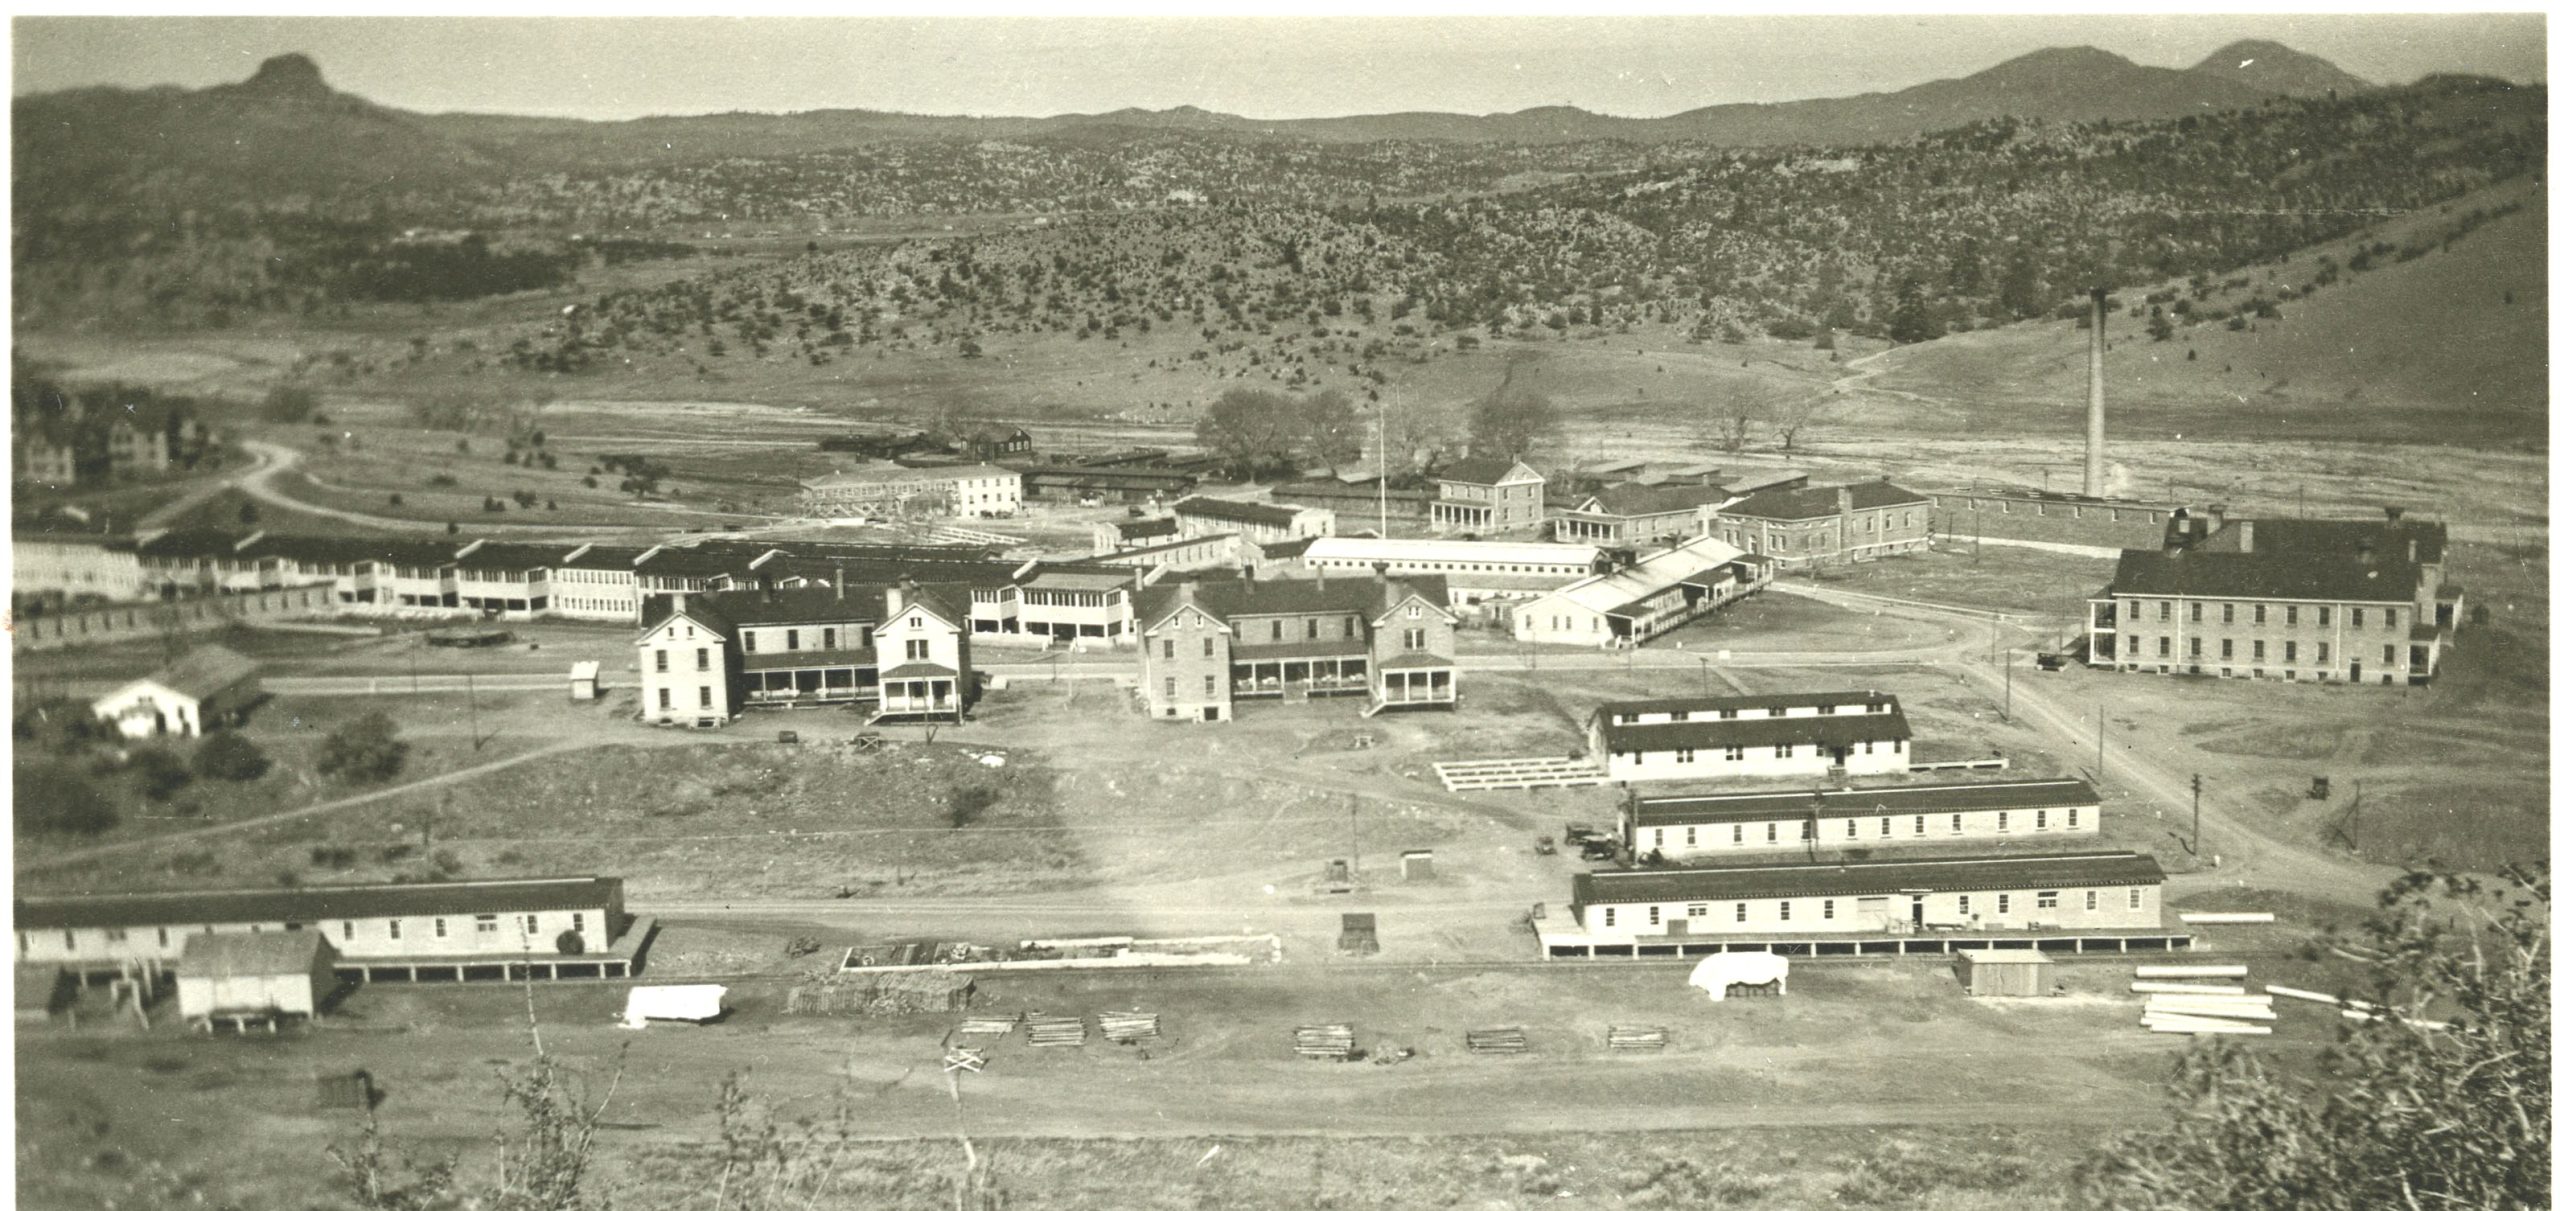 Read Fort Whipple – Historic VA Medical Center started as Army post